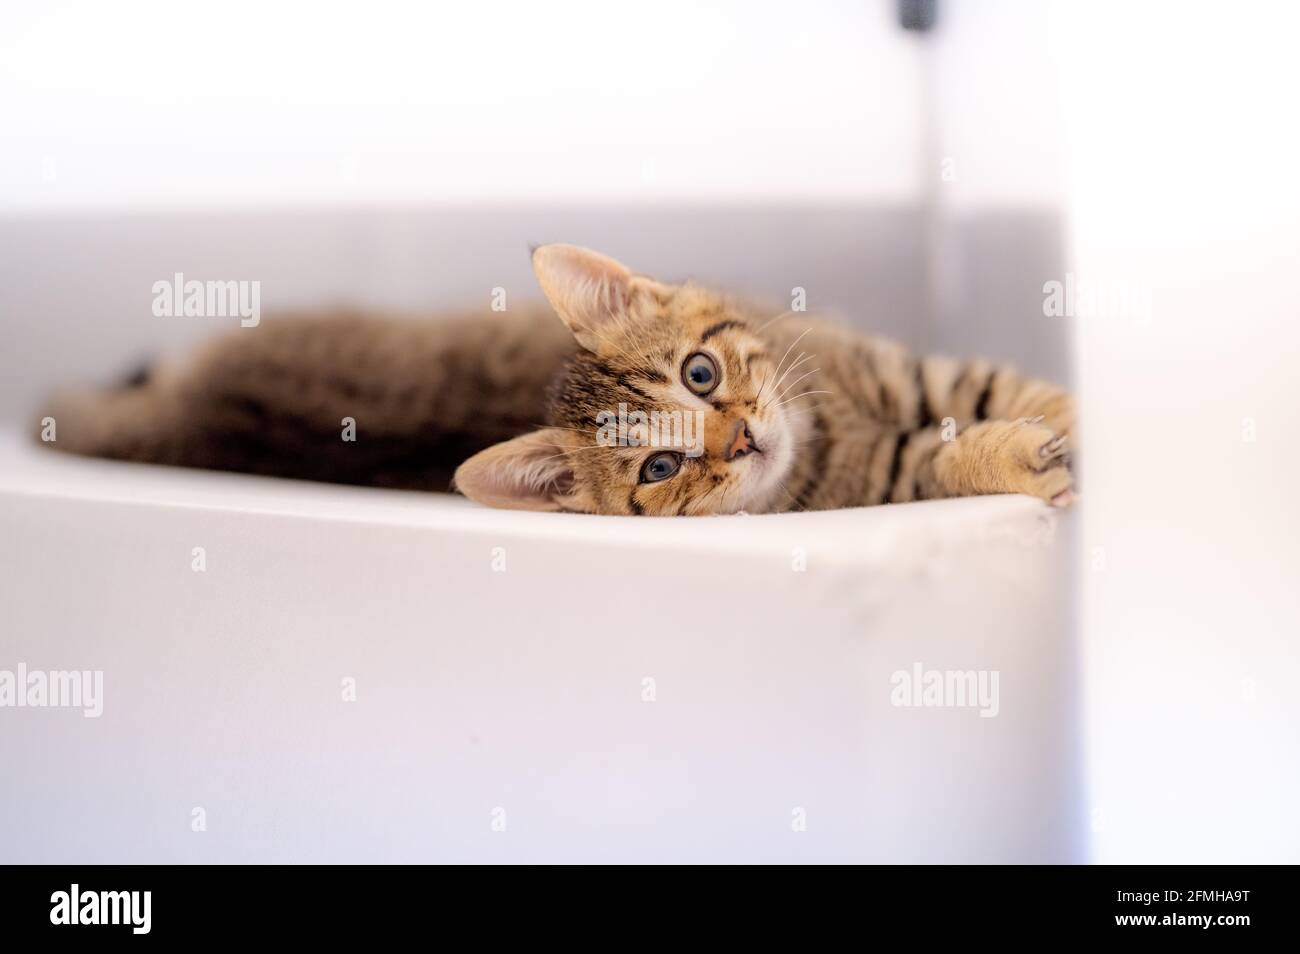 Tabby kitten looking up white background Stock Photo